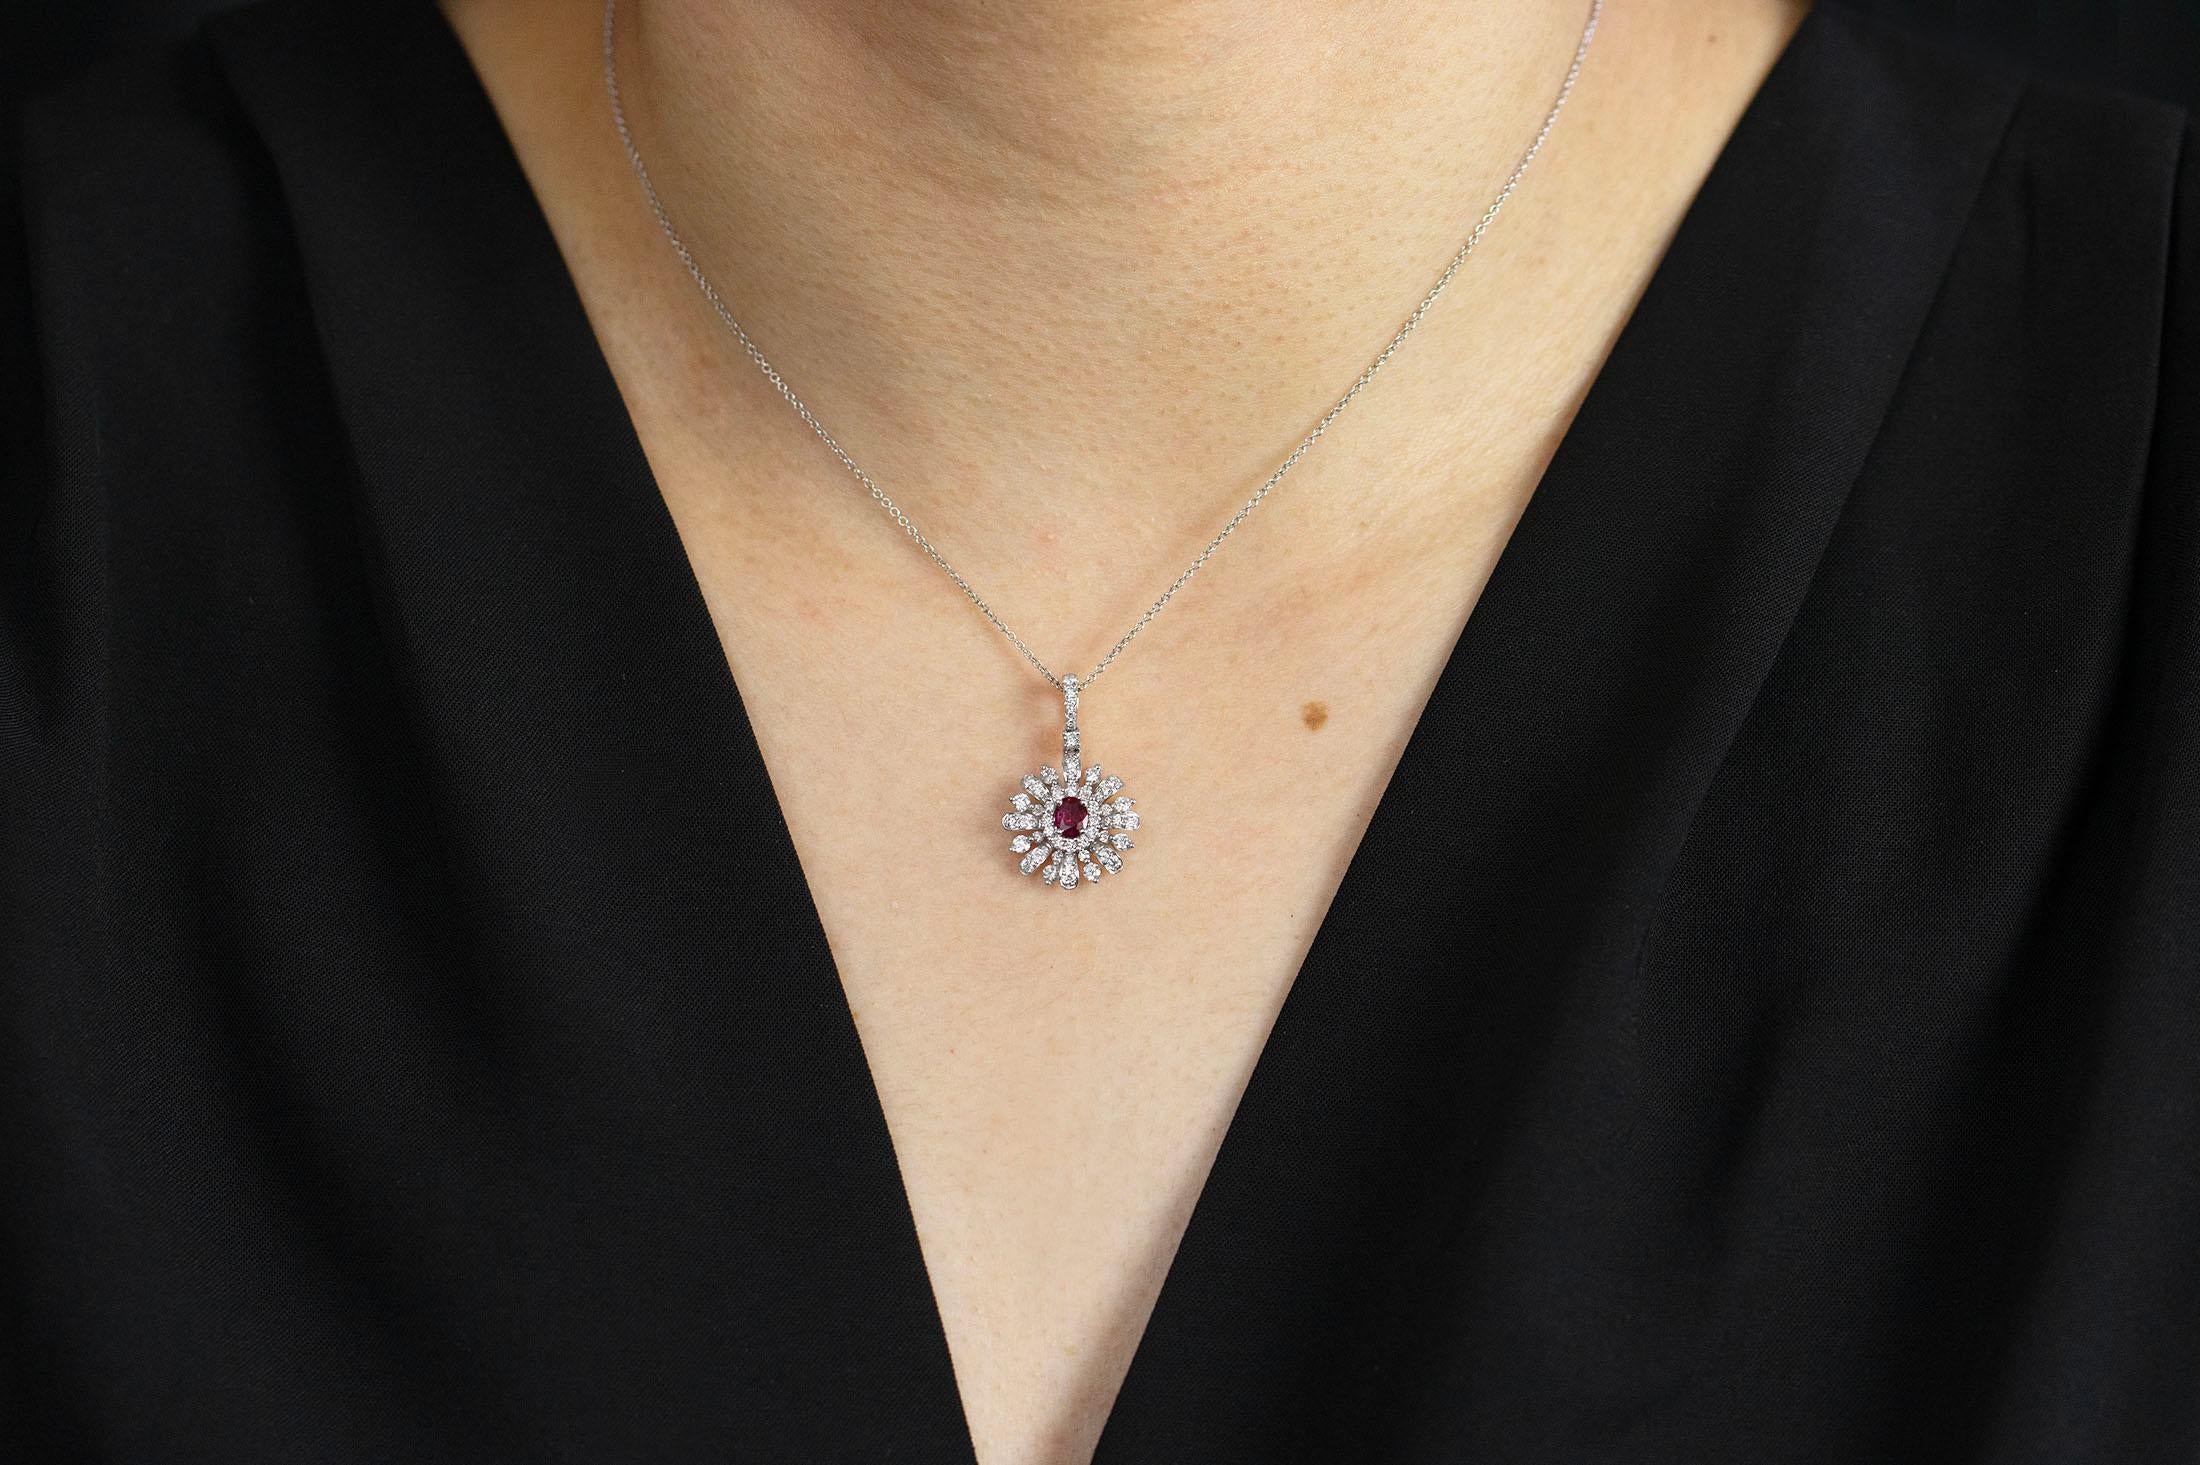 A fashionable and beautiful piece of jewelry showcasing a 0.32 carats color-rich oval cut ruby, set in an intricately sunburst design accented with brilliant round diamonds. Diamonds weigh 0.81 carats total. Made in 18K white gold and suspended on